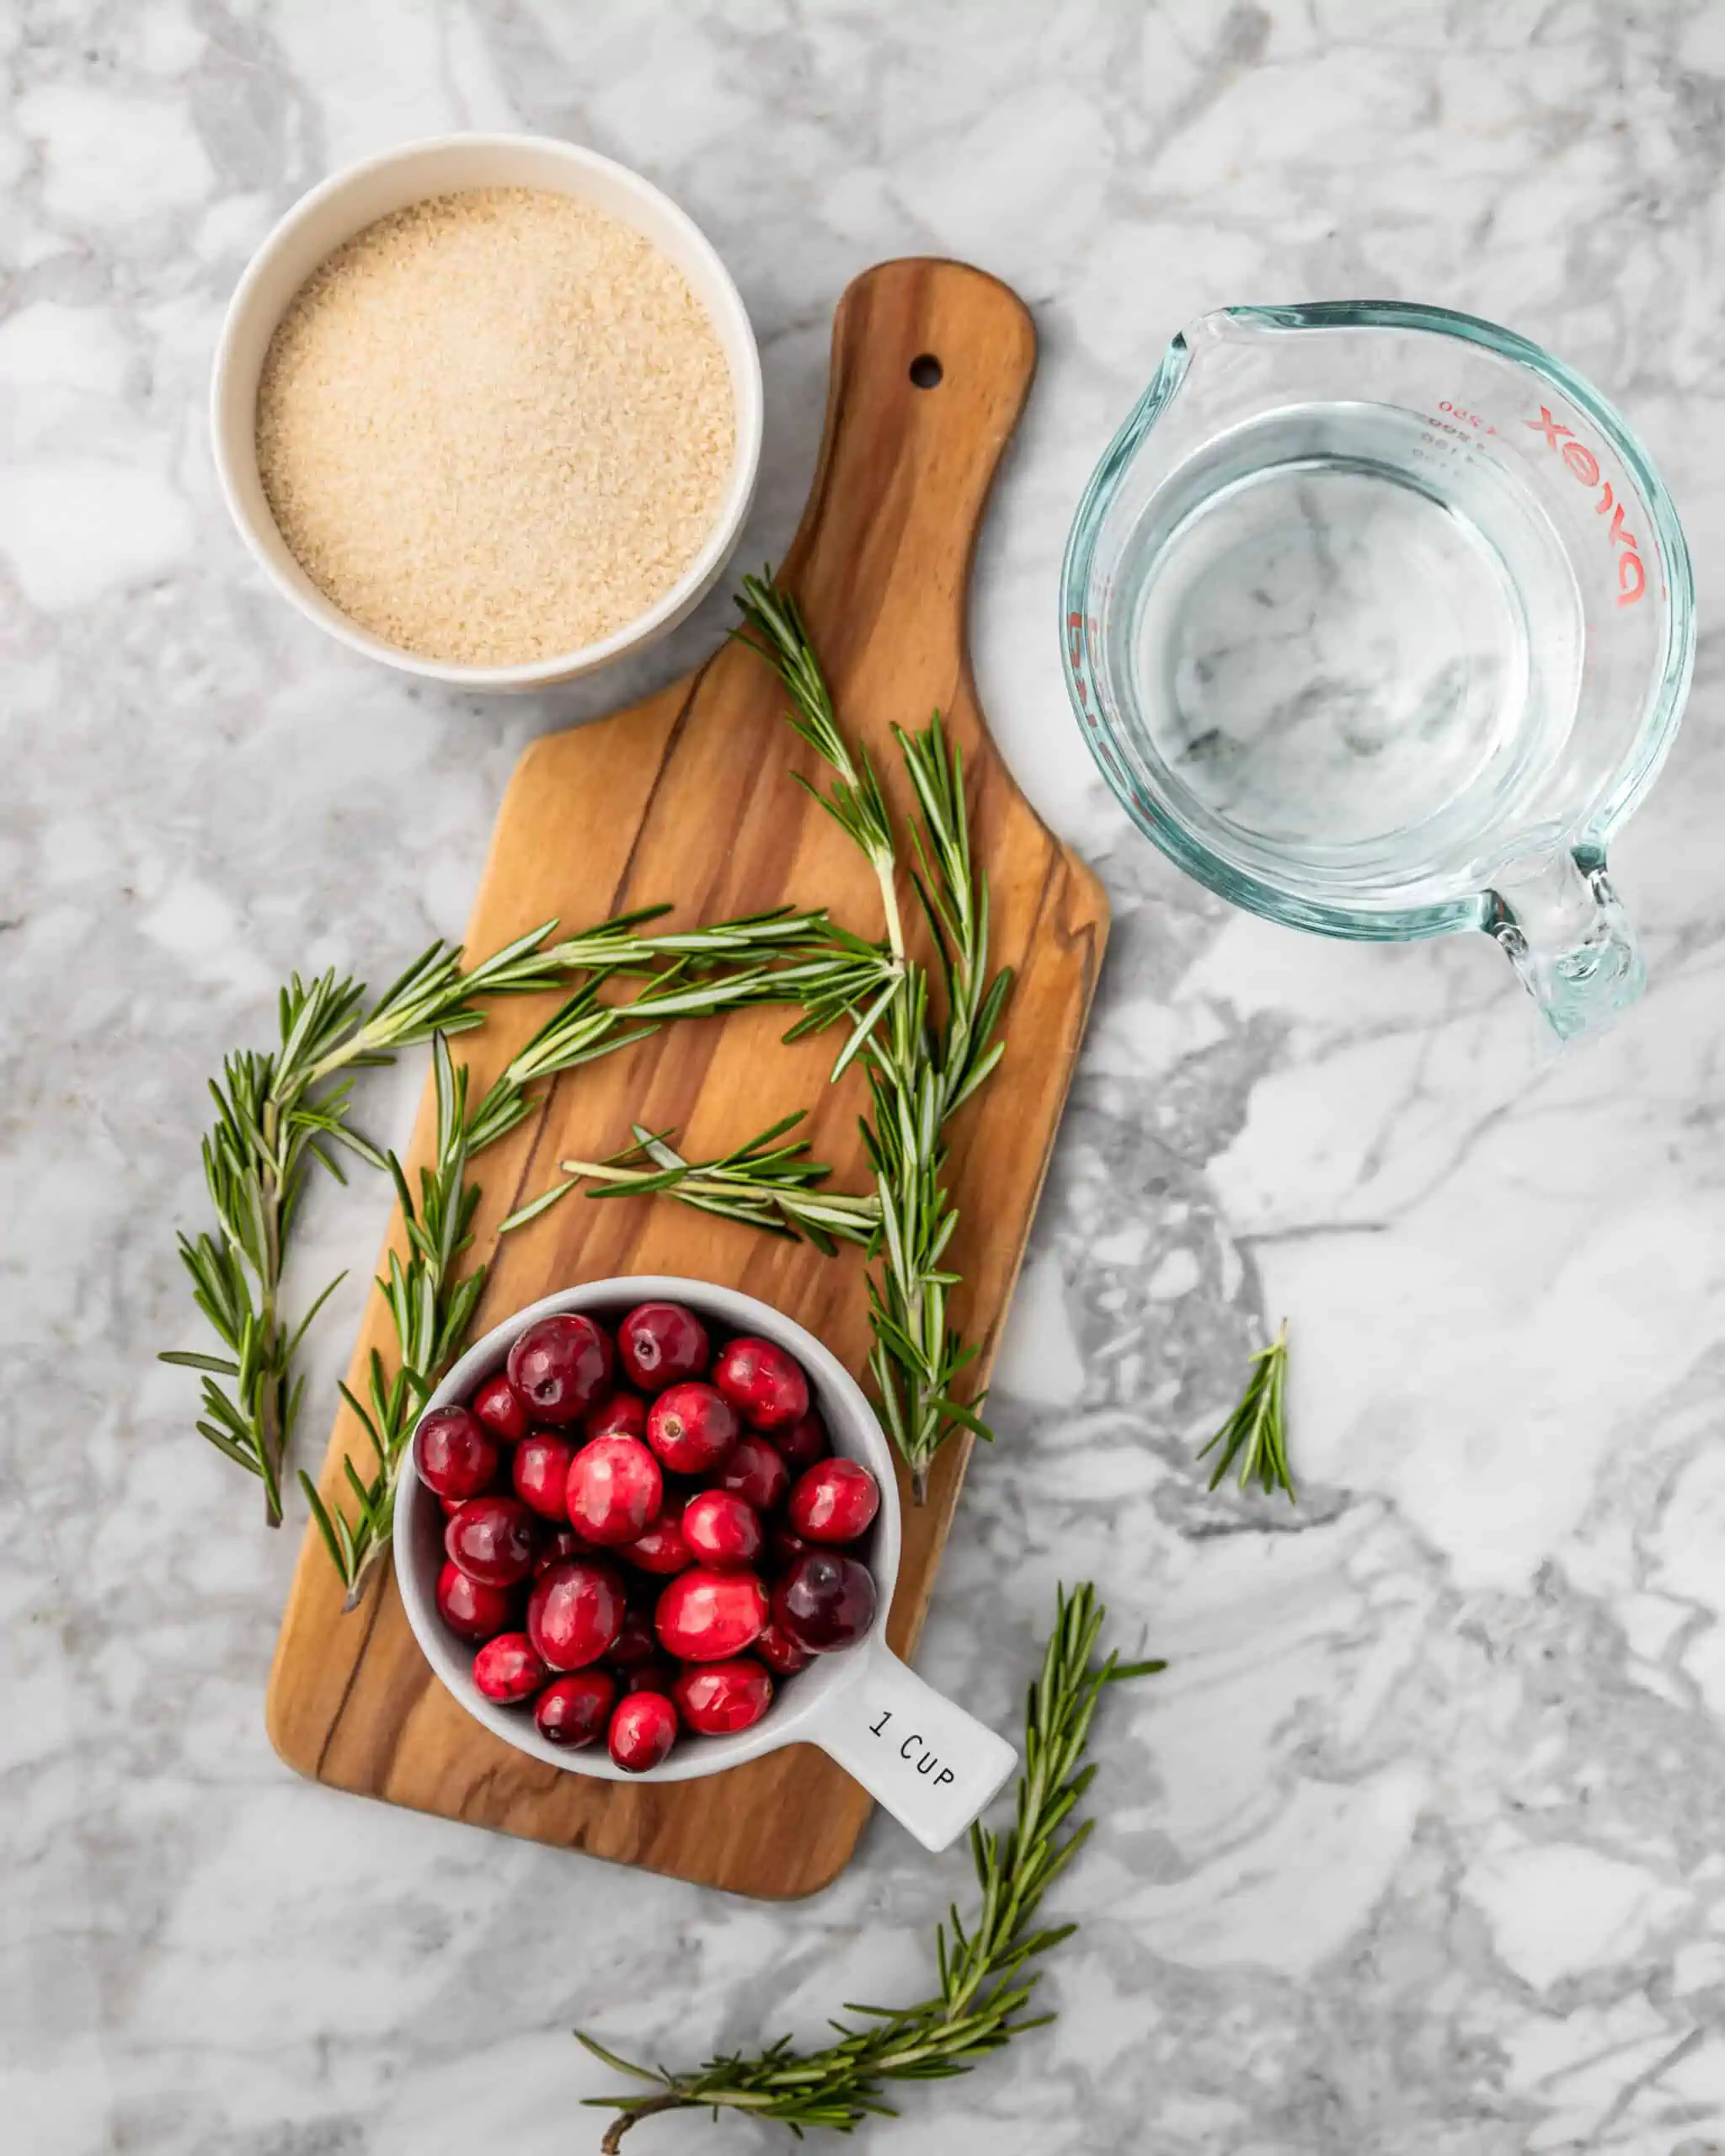 sugar rosemary and cranberry ingredients.